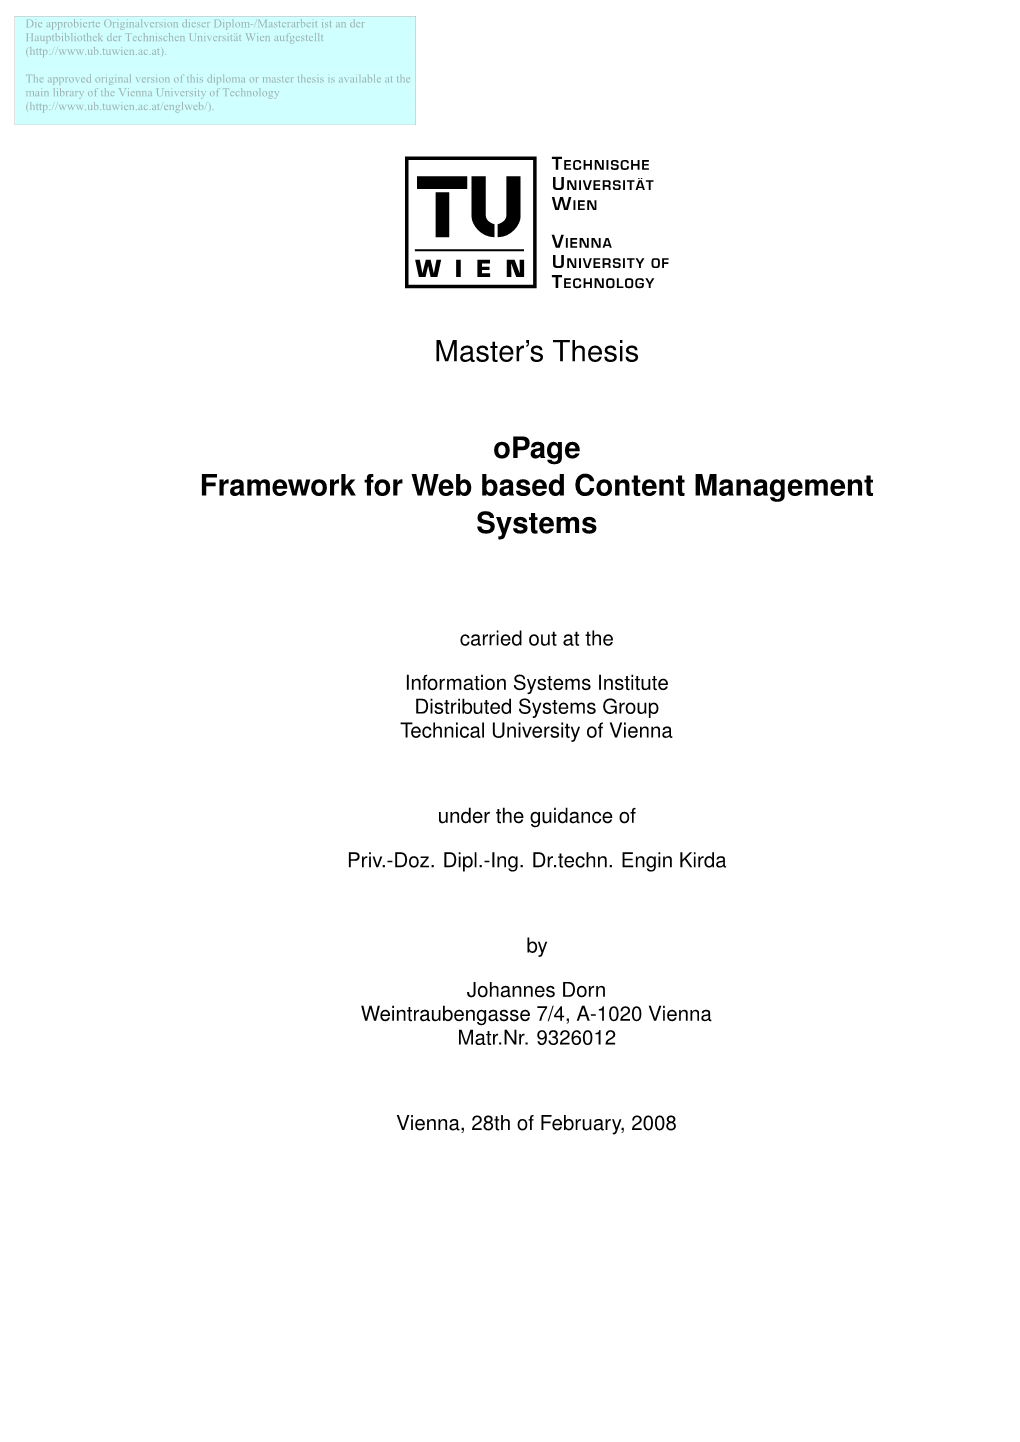 Opage Framework for Web Based Content Management Systems